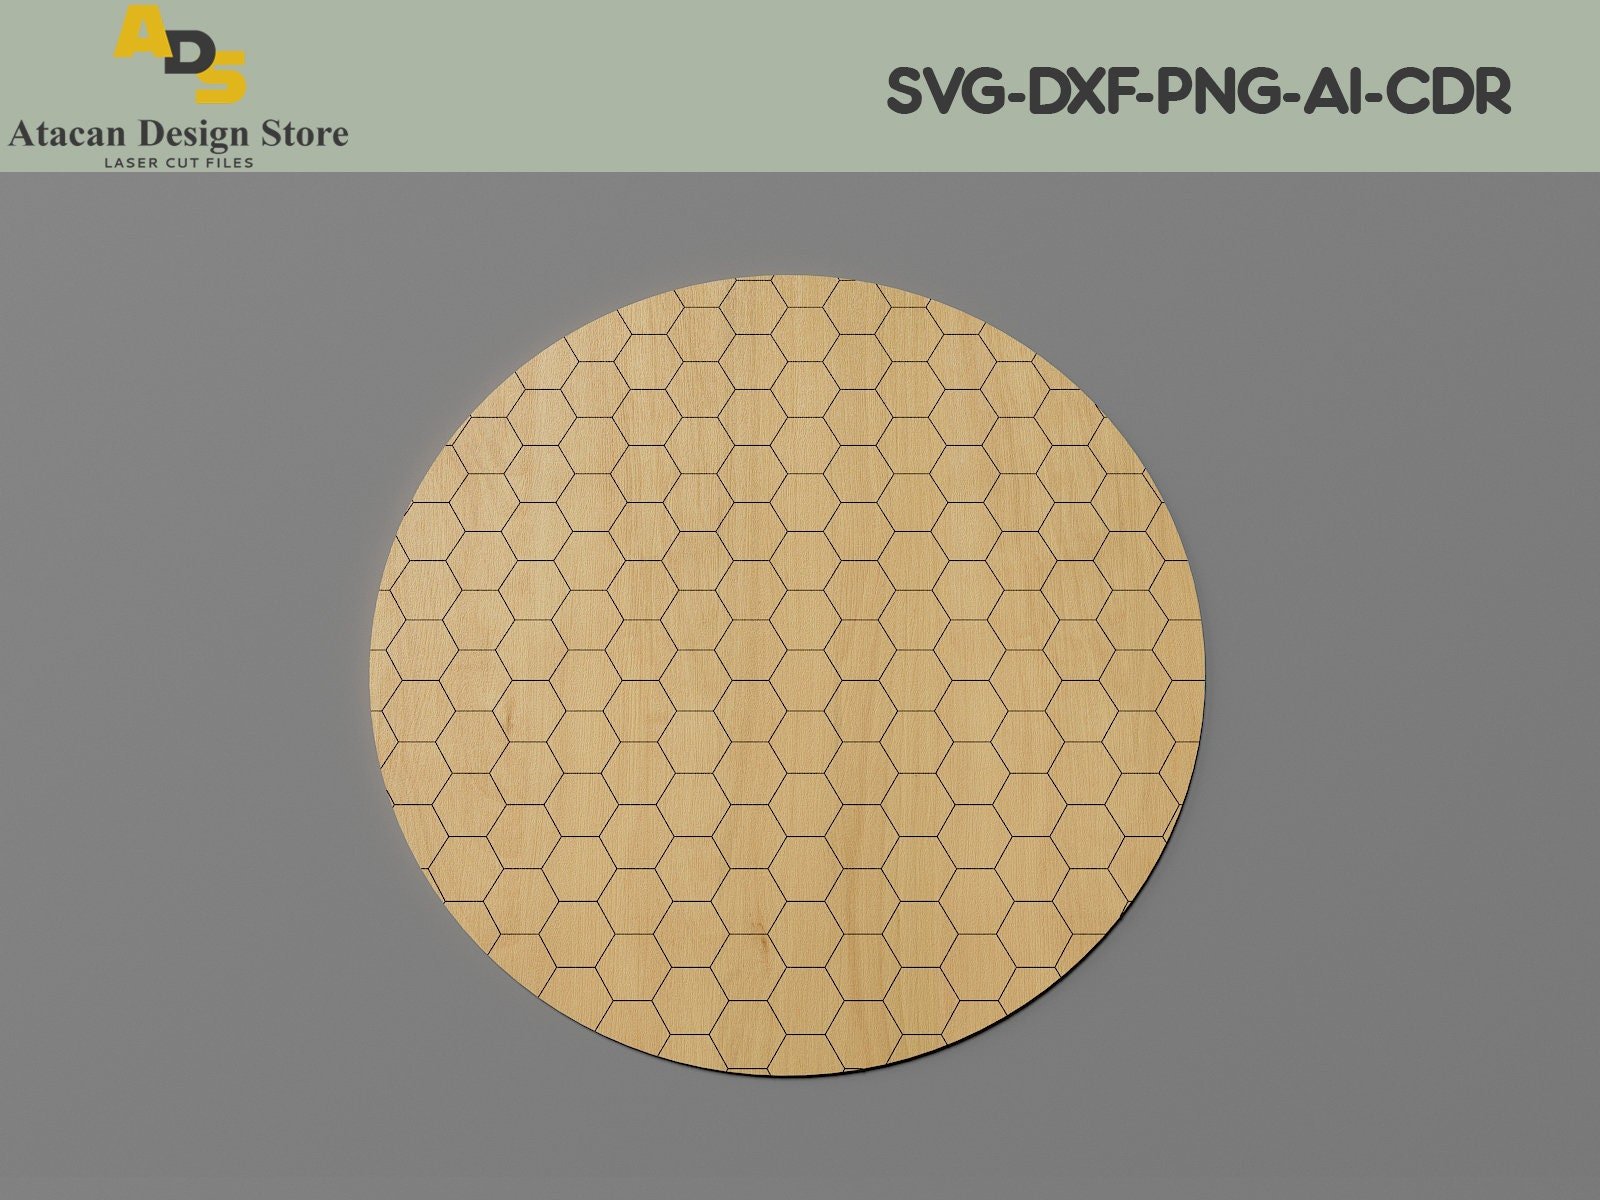 18 inch Round With Honeycomb 4 Different Patterns Svg, Dxf, Cdr, Ai files ADS225